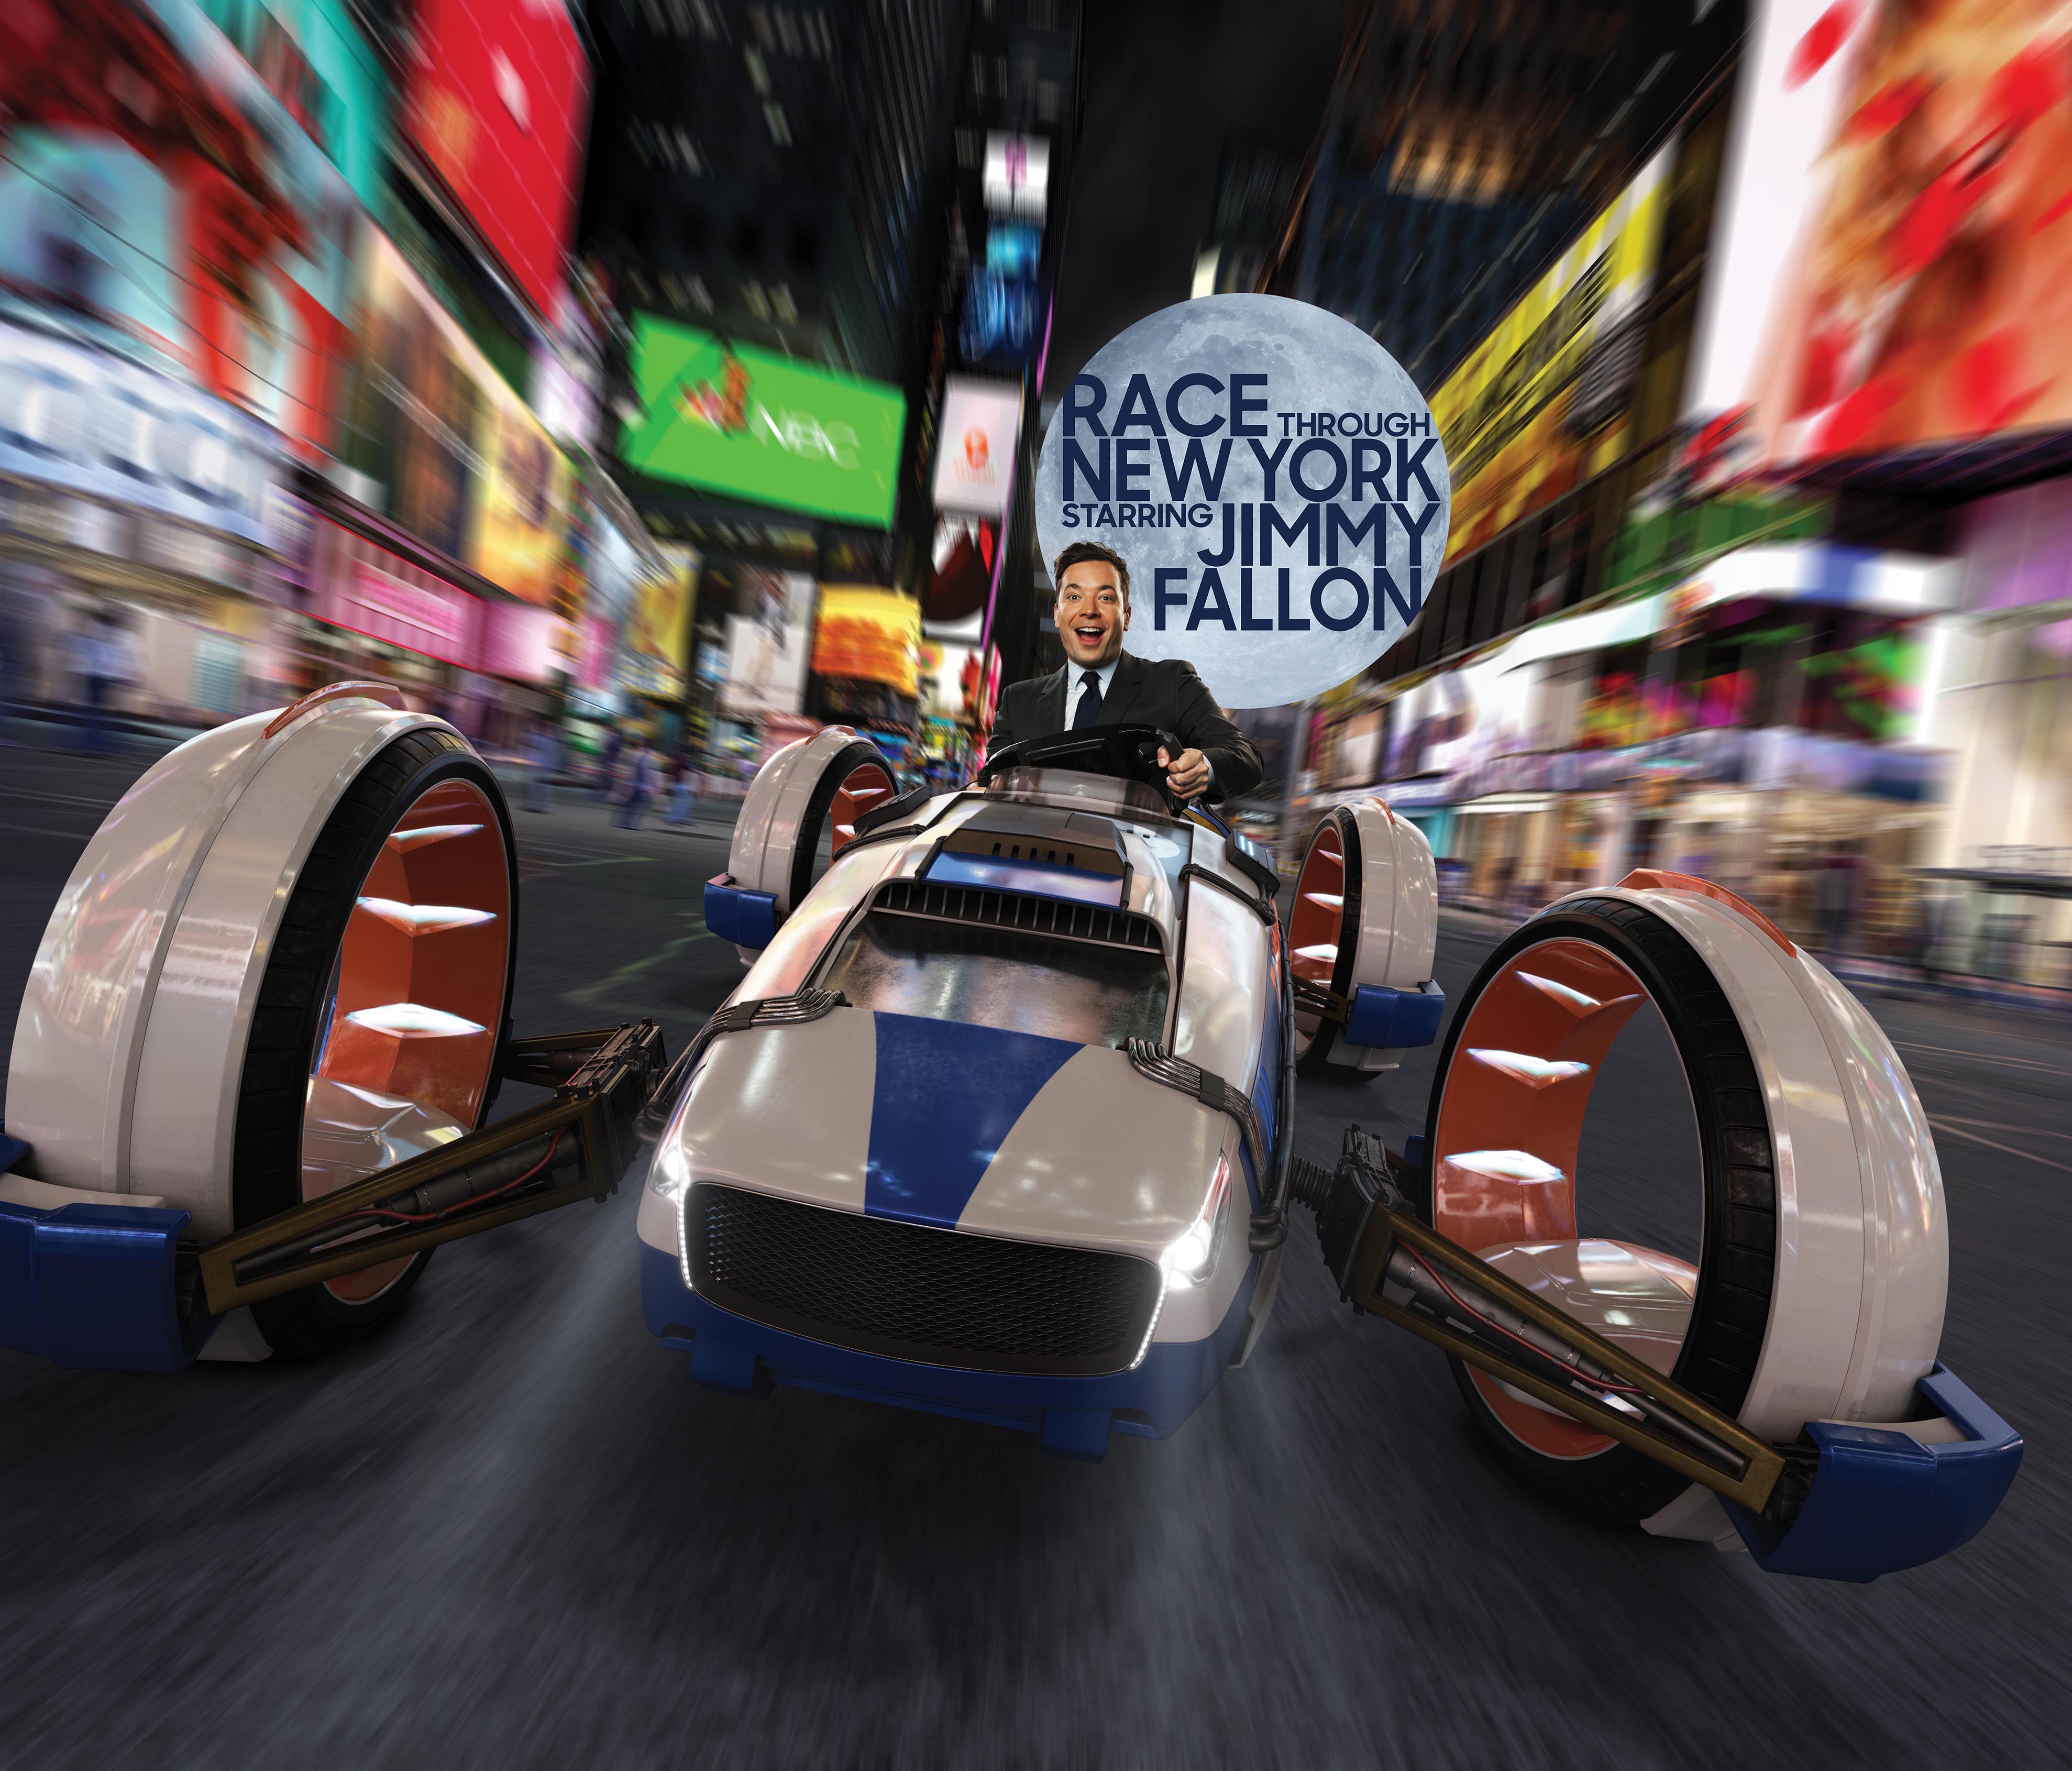  Publicity and conceptual stills provided by Universal Orlando. A media preview was held for the new Race Through New York Starring Jimmy Fallon attraction at Universal Orlando.